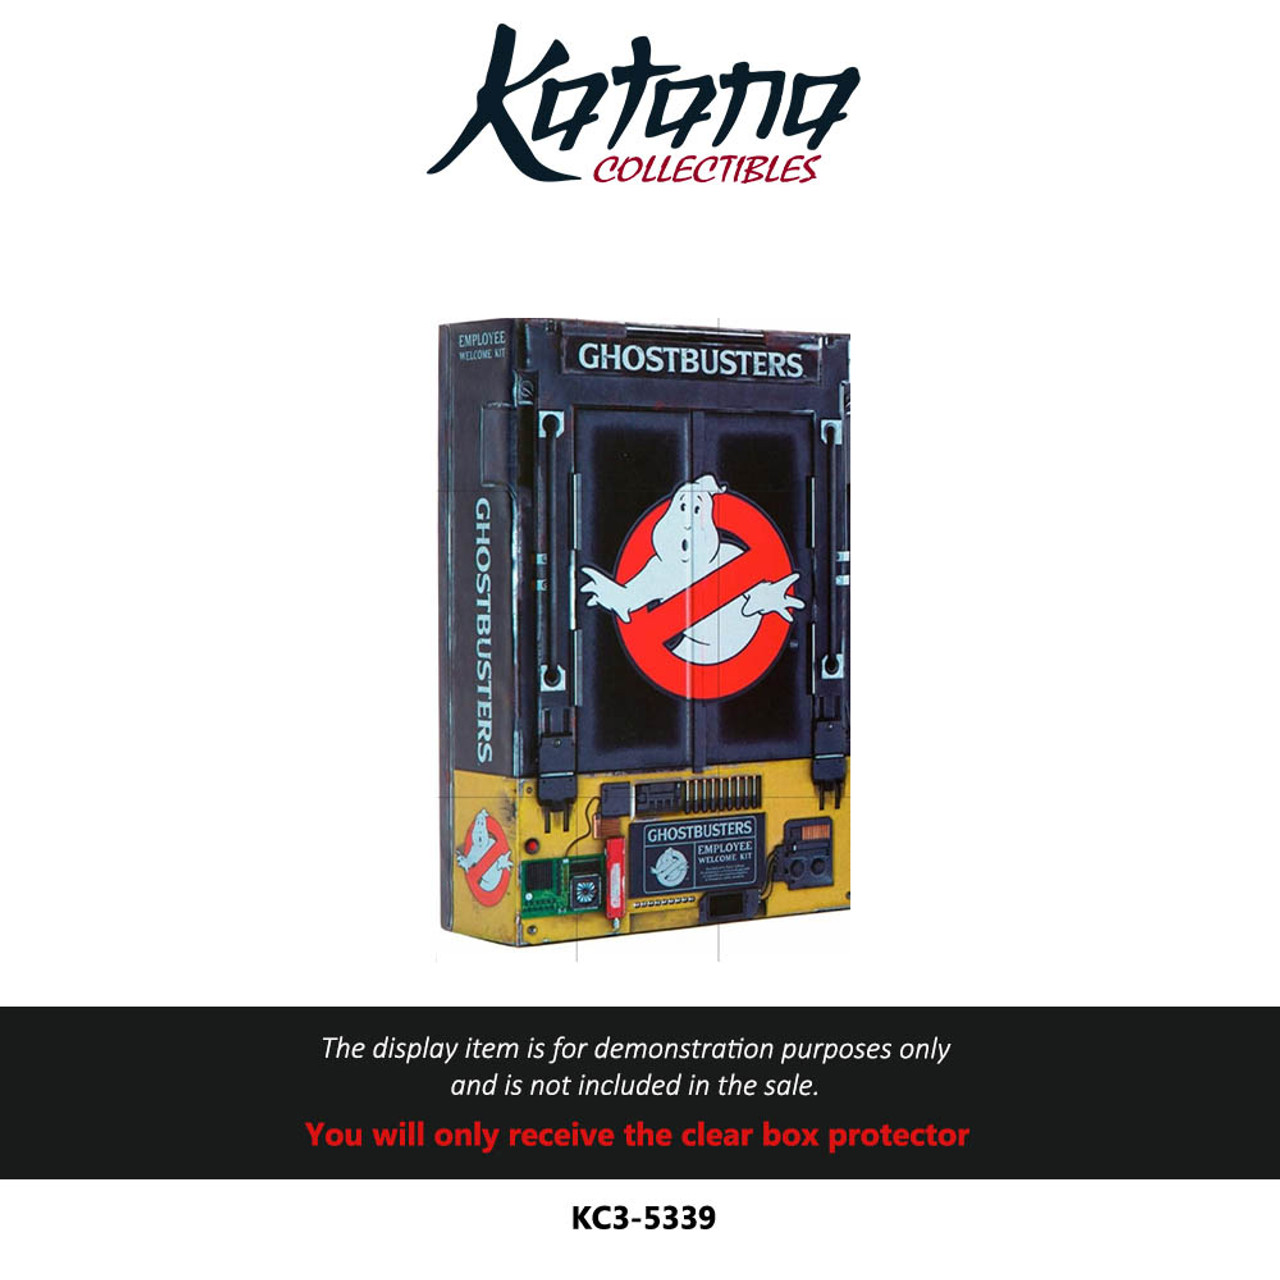 Katana Collectibles Protector For Ghostbusters Employee Starter Kit